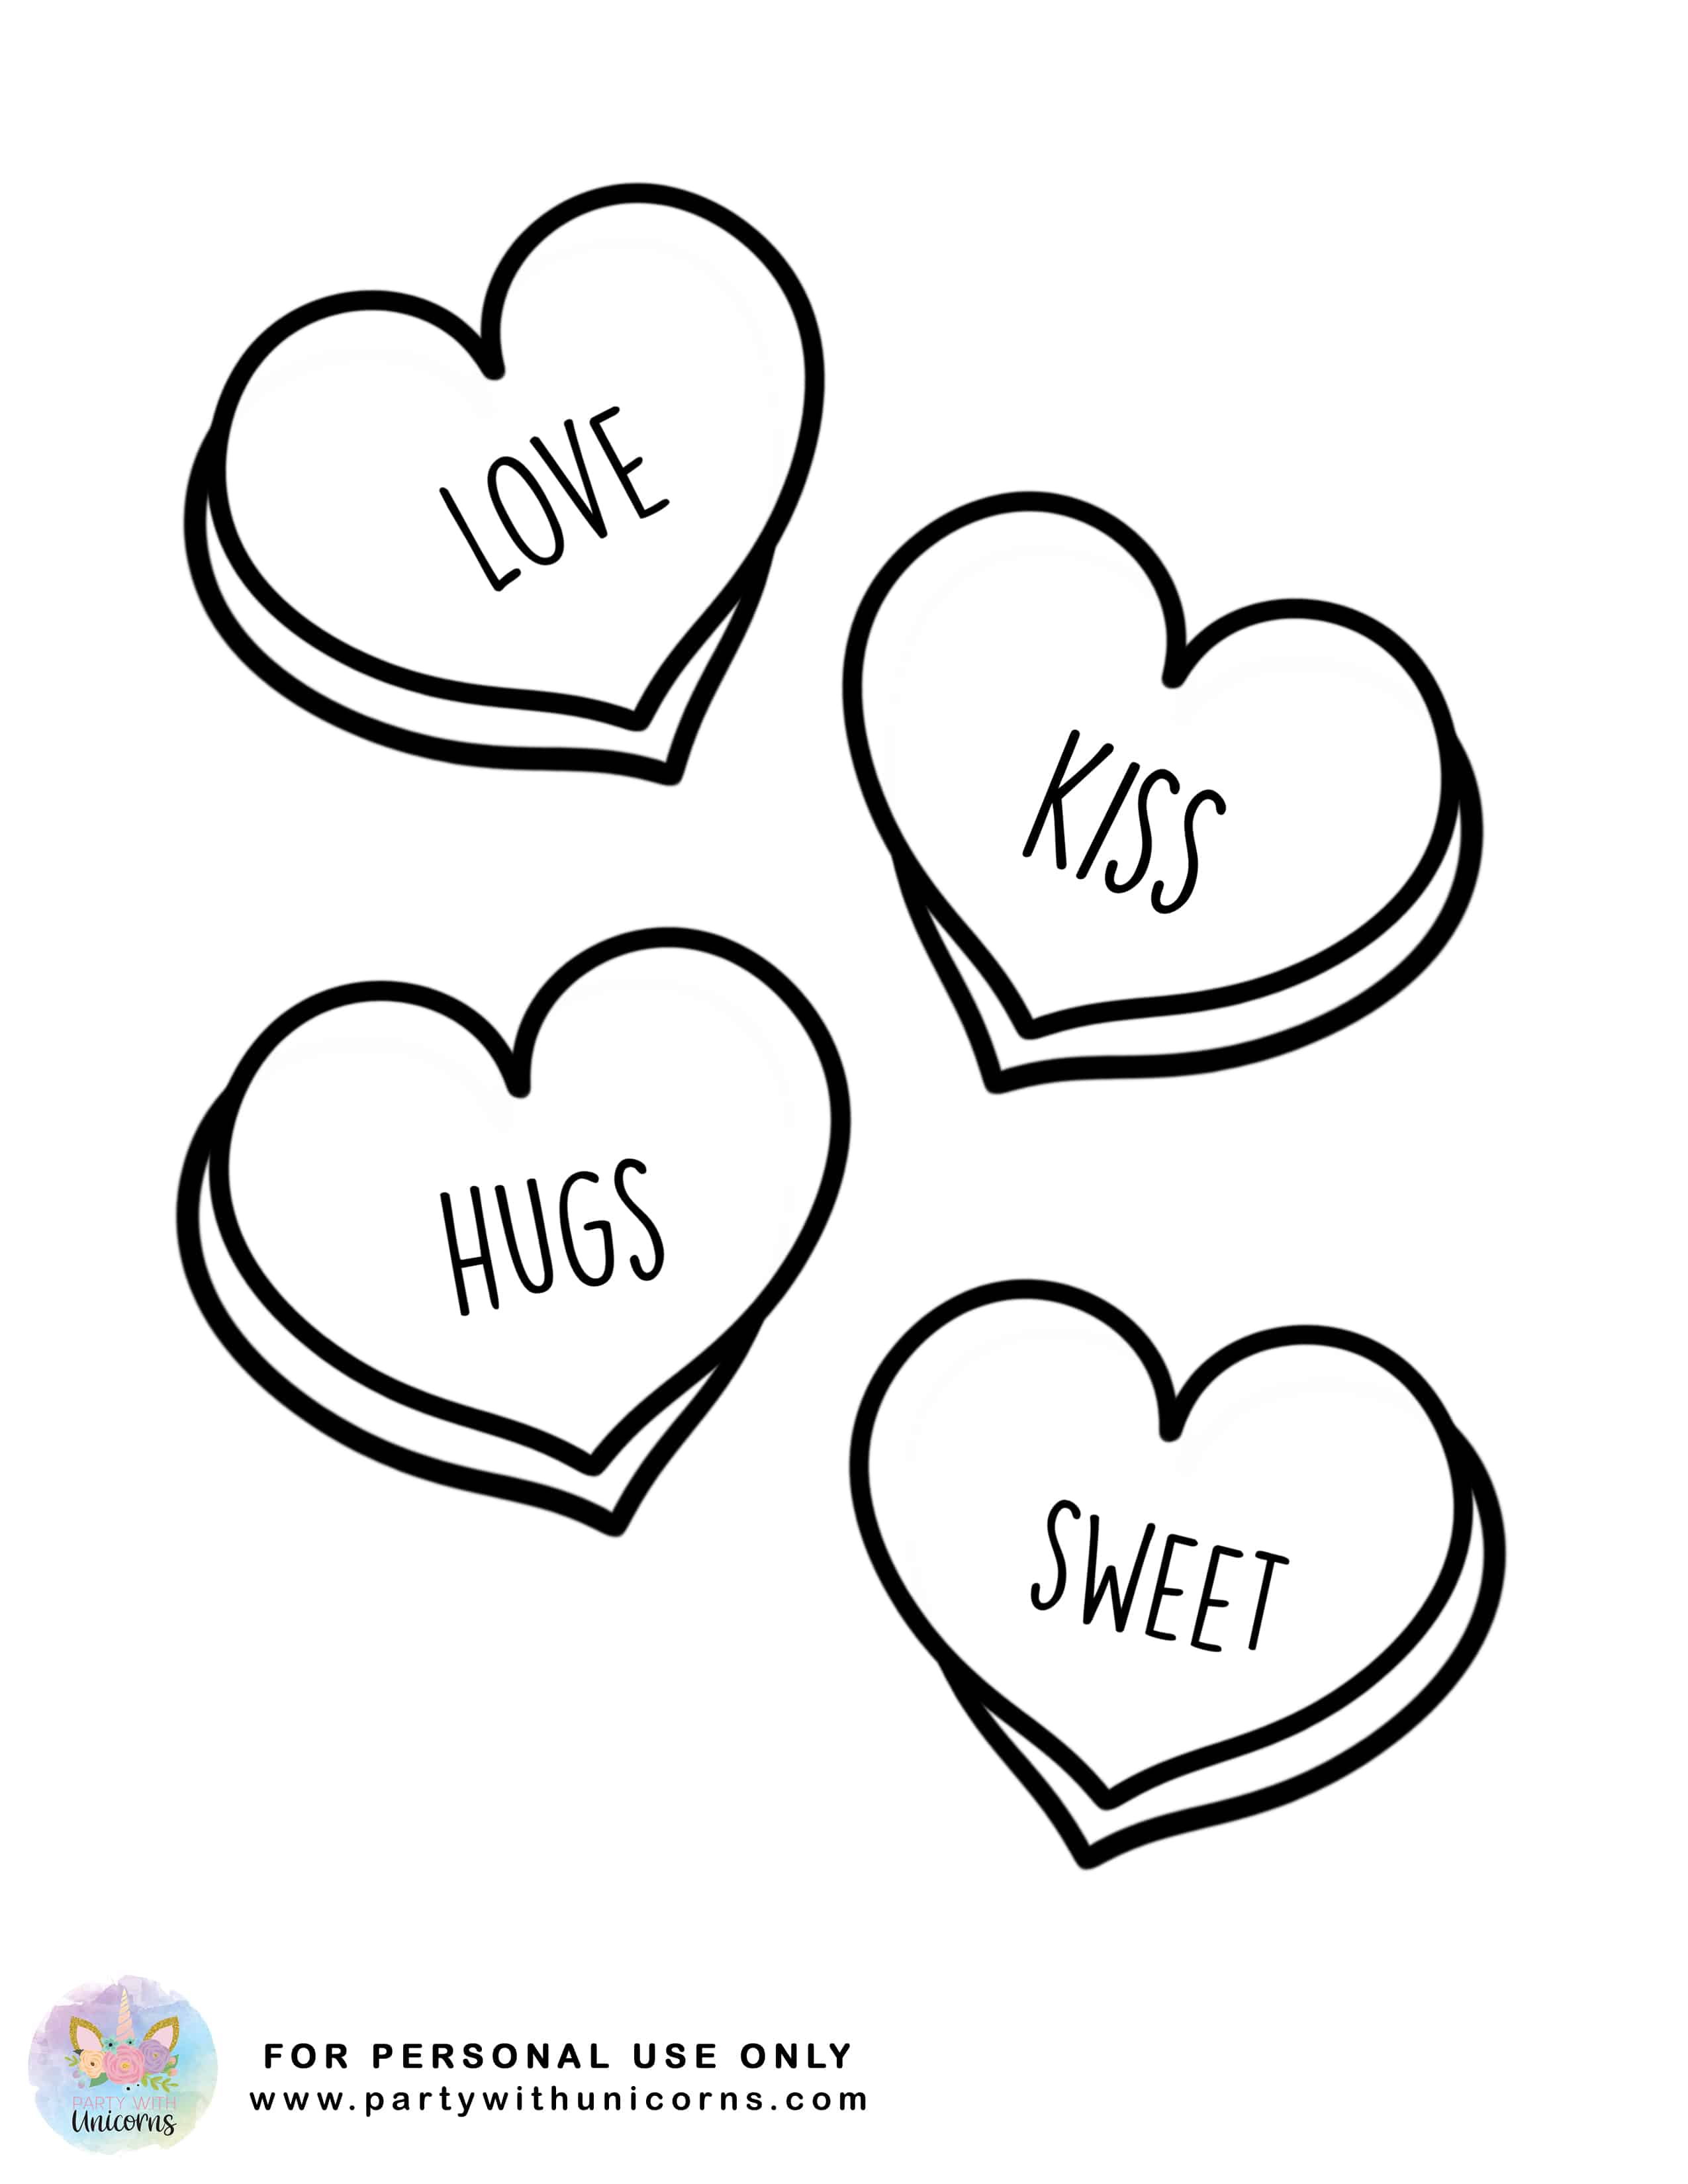 among us valentine coloring pages